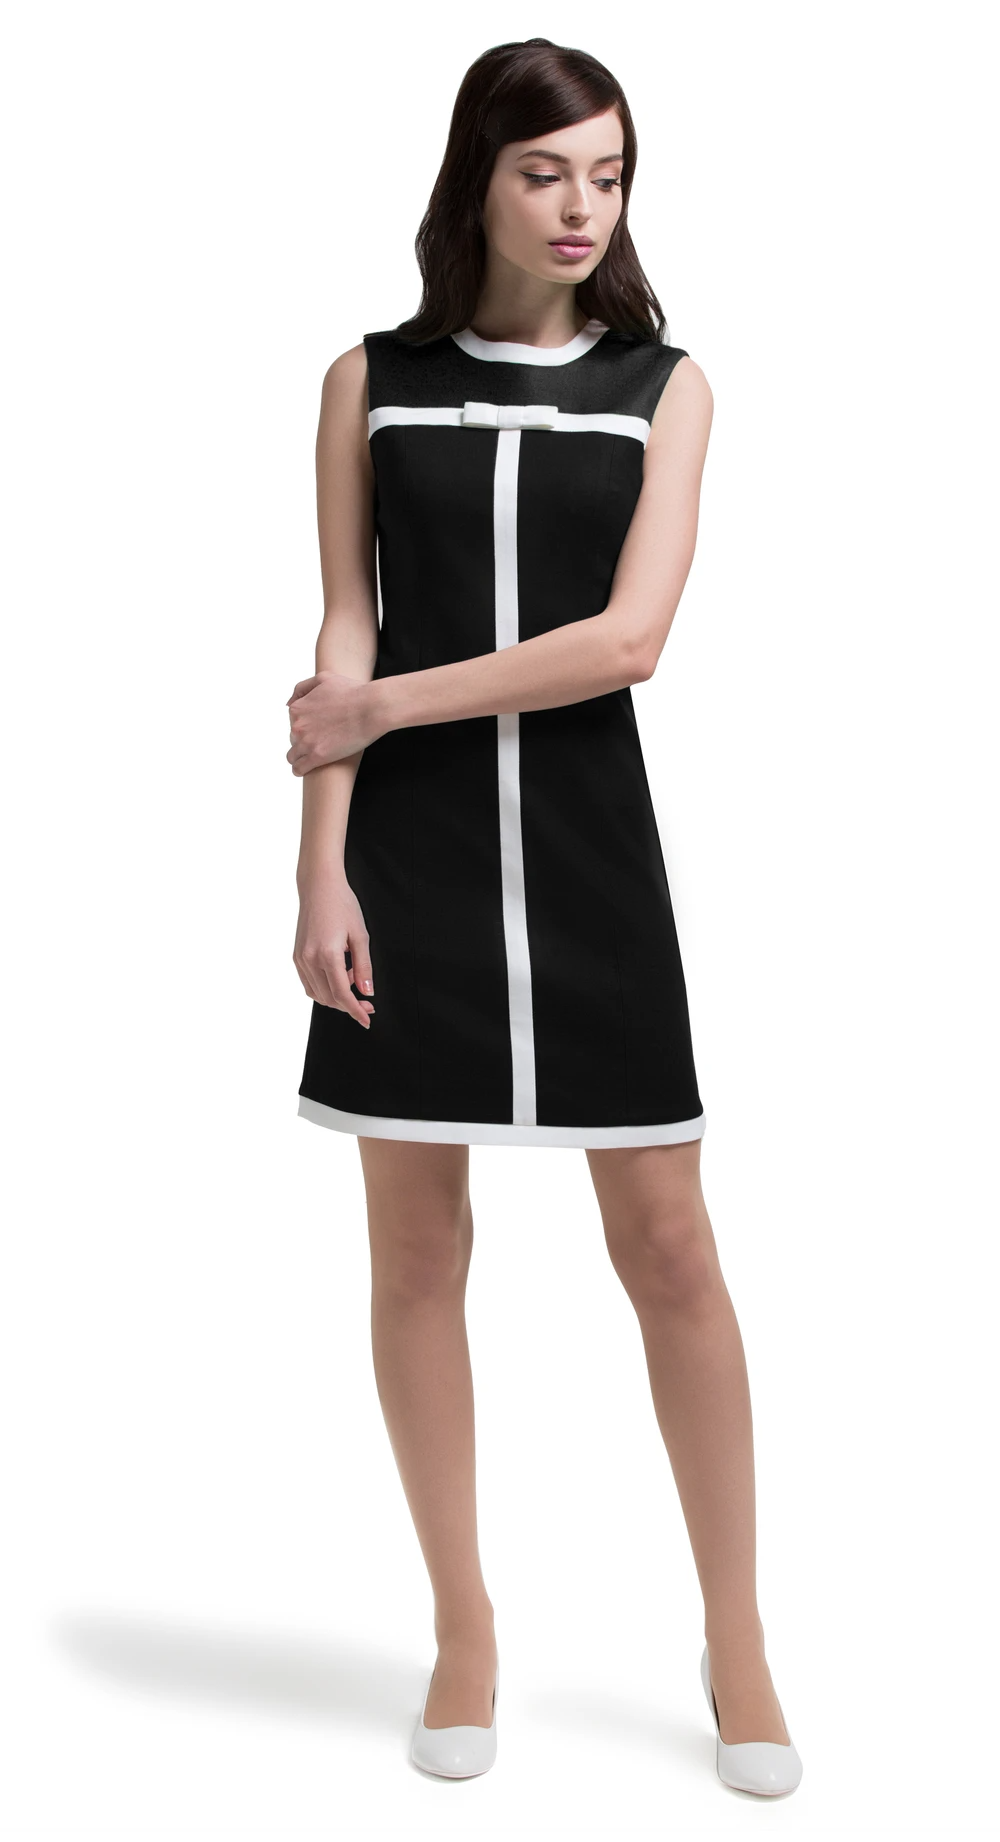 MARMALADE Mod 60s Style Dress with Black Panel -   60s style Dress